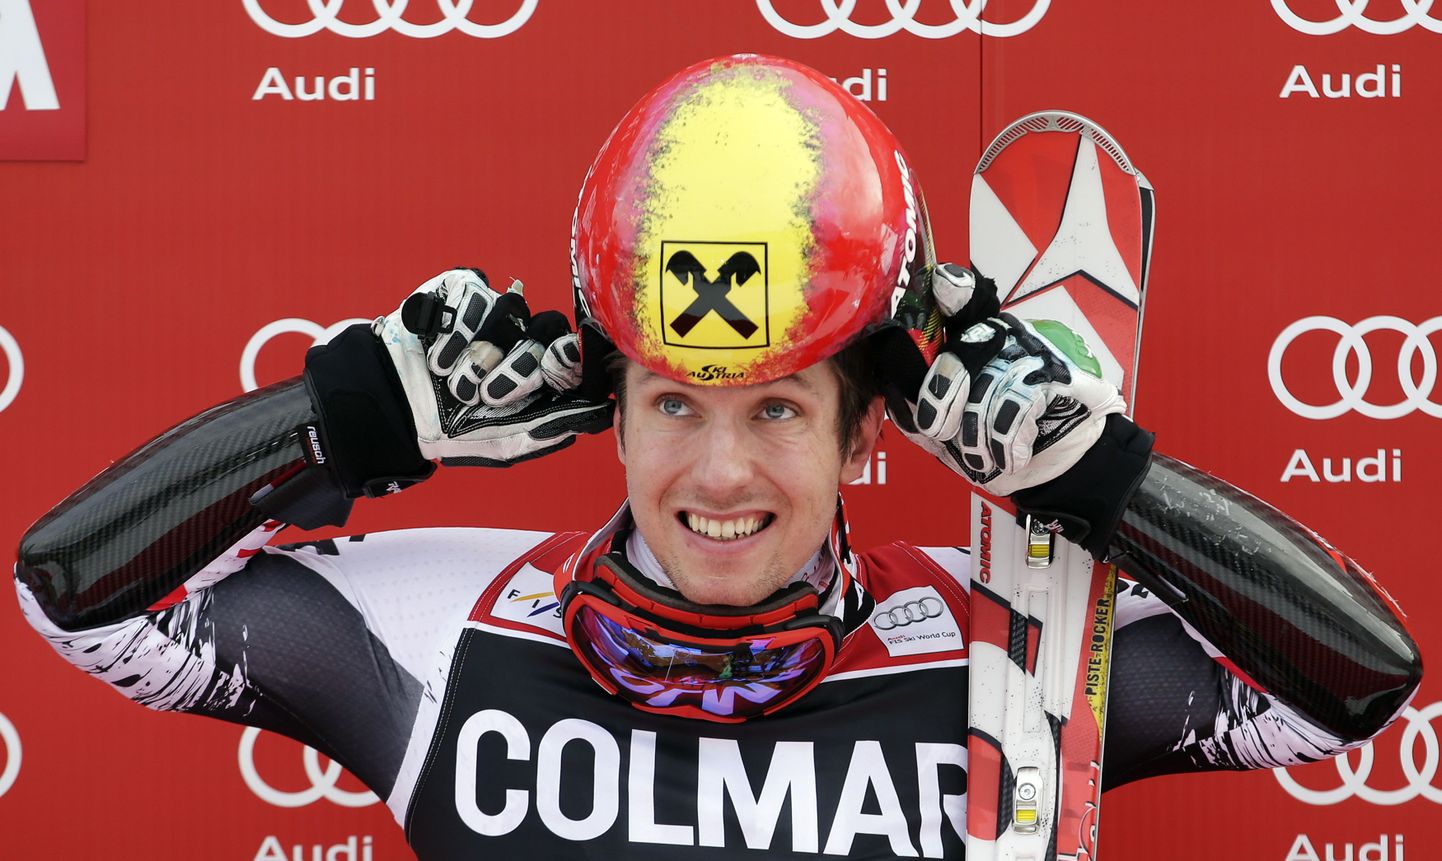 Marcel Hirscher of Austria takes off his helmet on the podium after winning in the men's World Cup Giant Slalom skiing race in Alta Badia December 22, 2013. REUTERS/Max Rossi  (ITALY - Tags: SPORT SKIING)